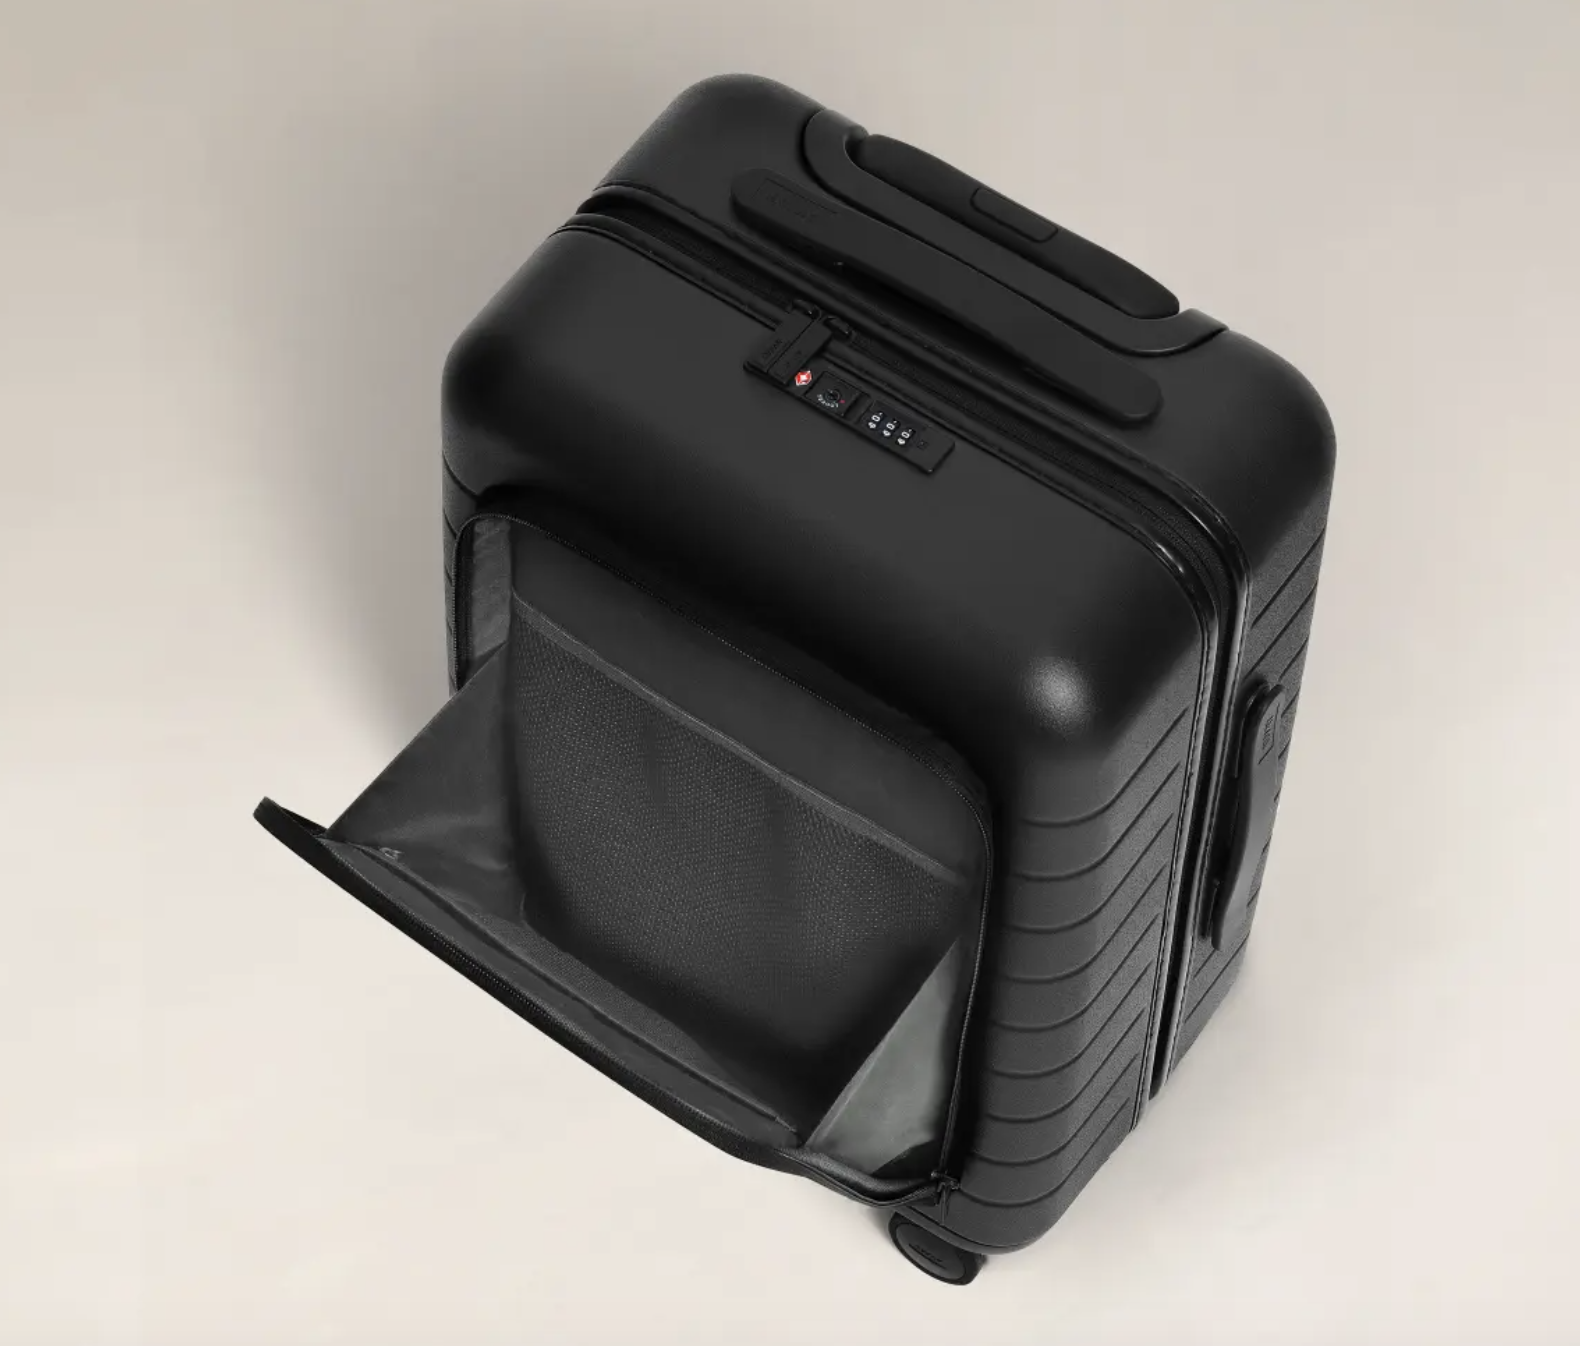 Away The Carry-On with Pocket